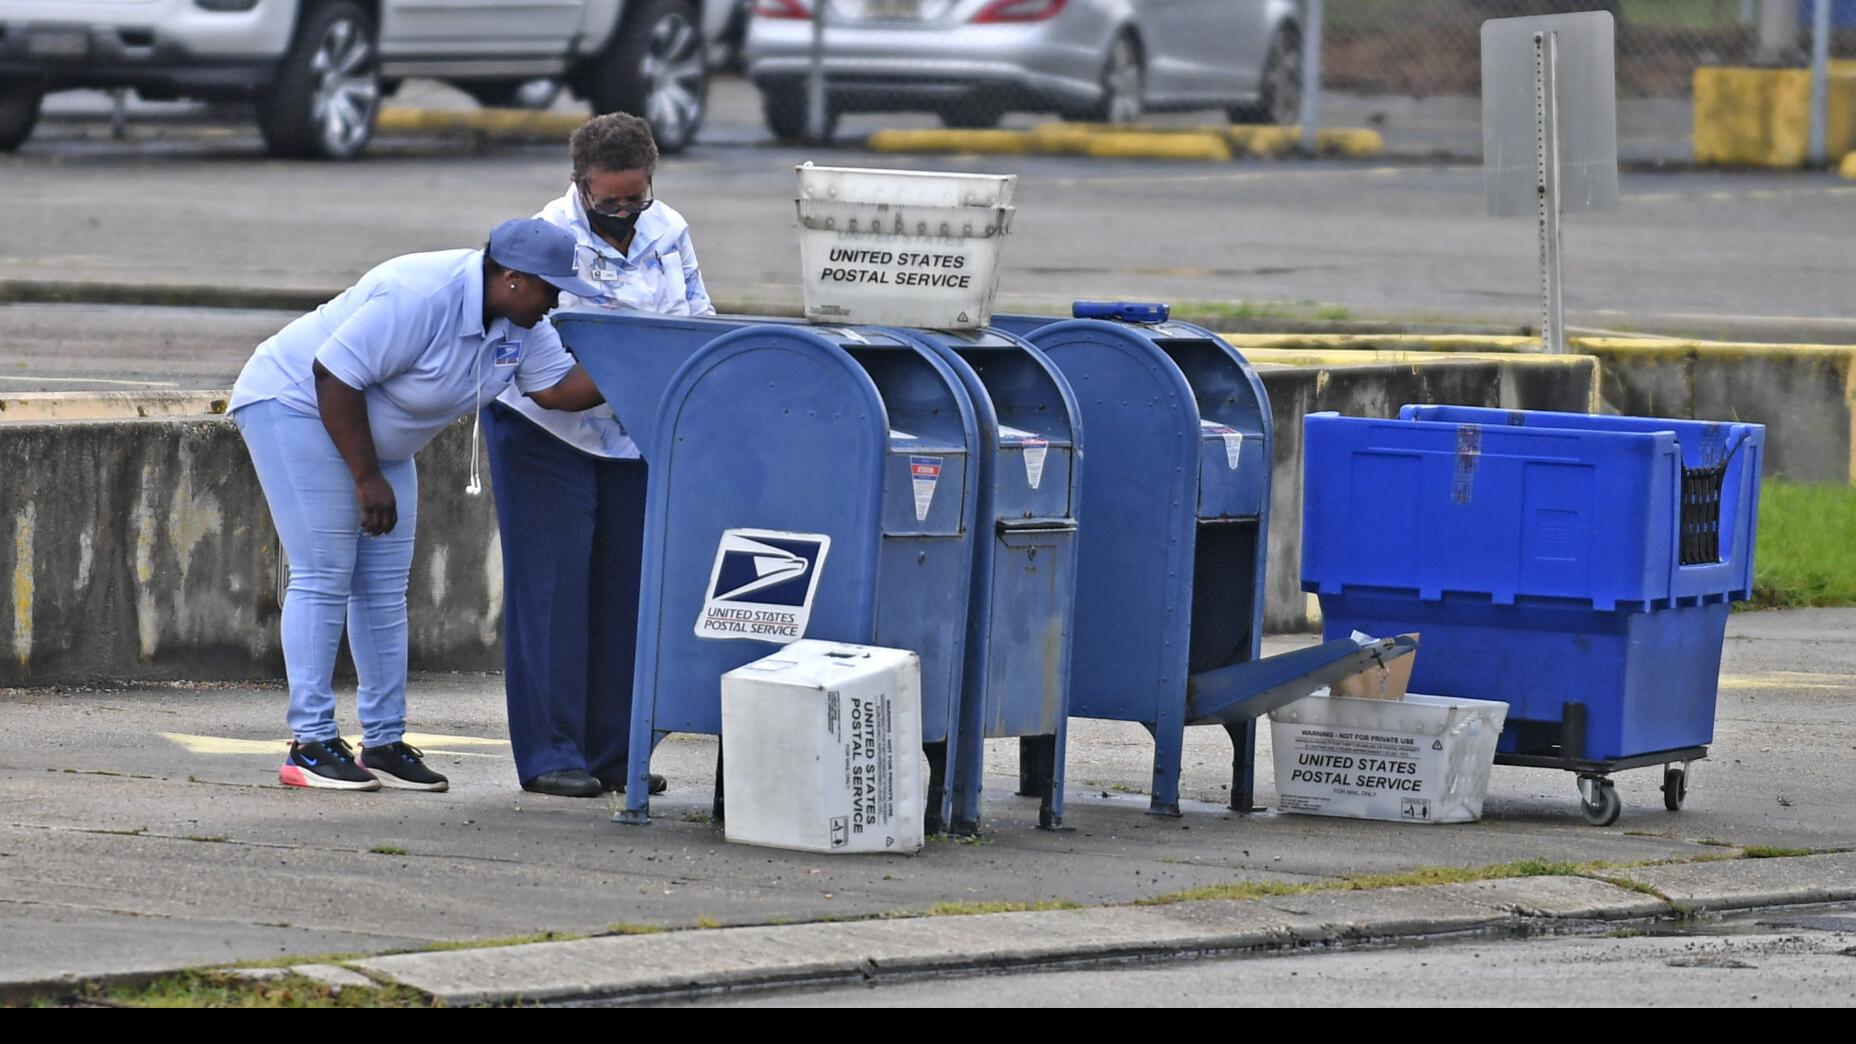 Post office stopping service in parts of southern Louisiana as Ida approaches | Weather/Traffic | theadvocate.com